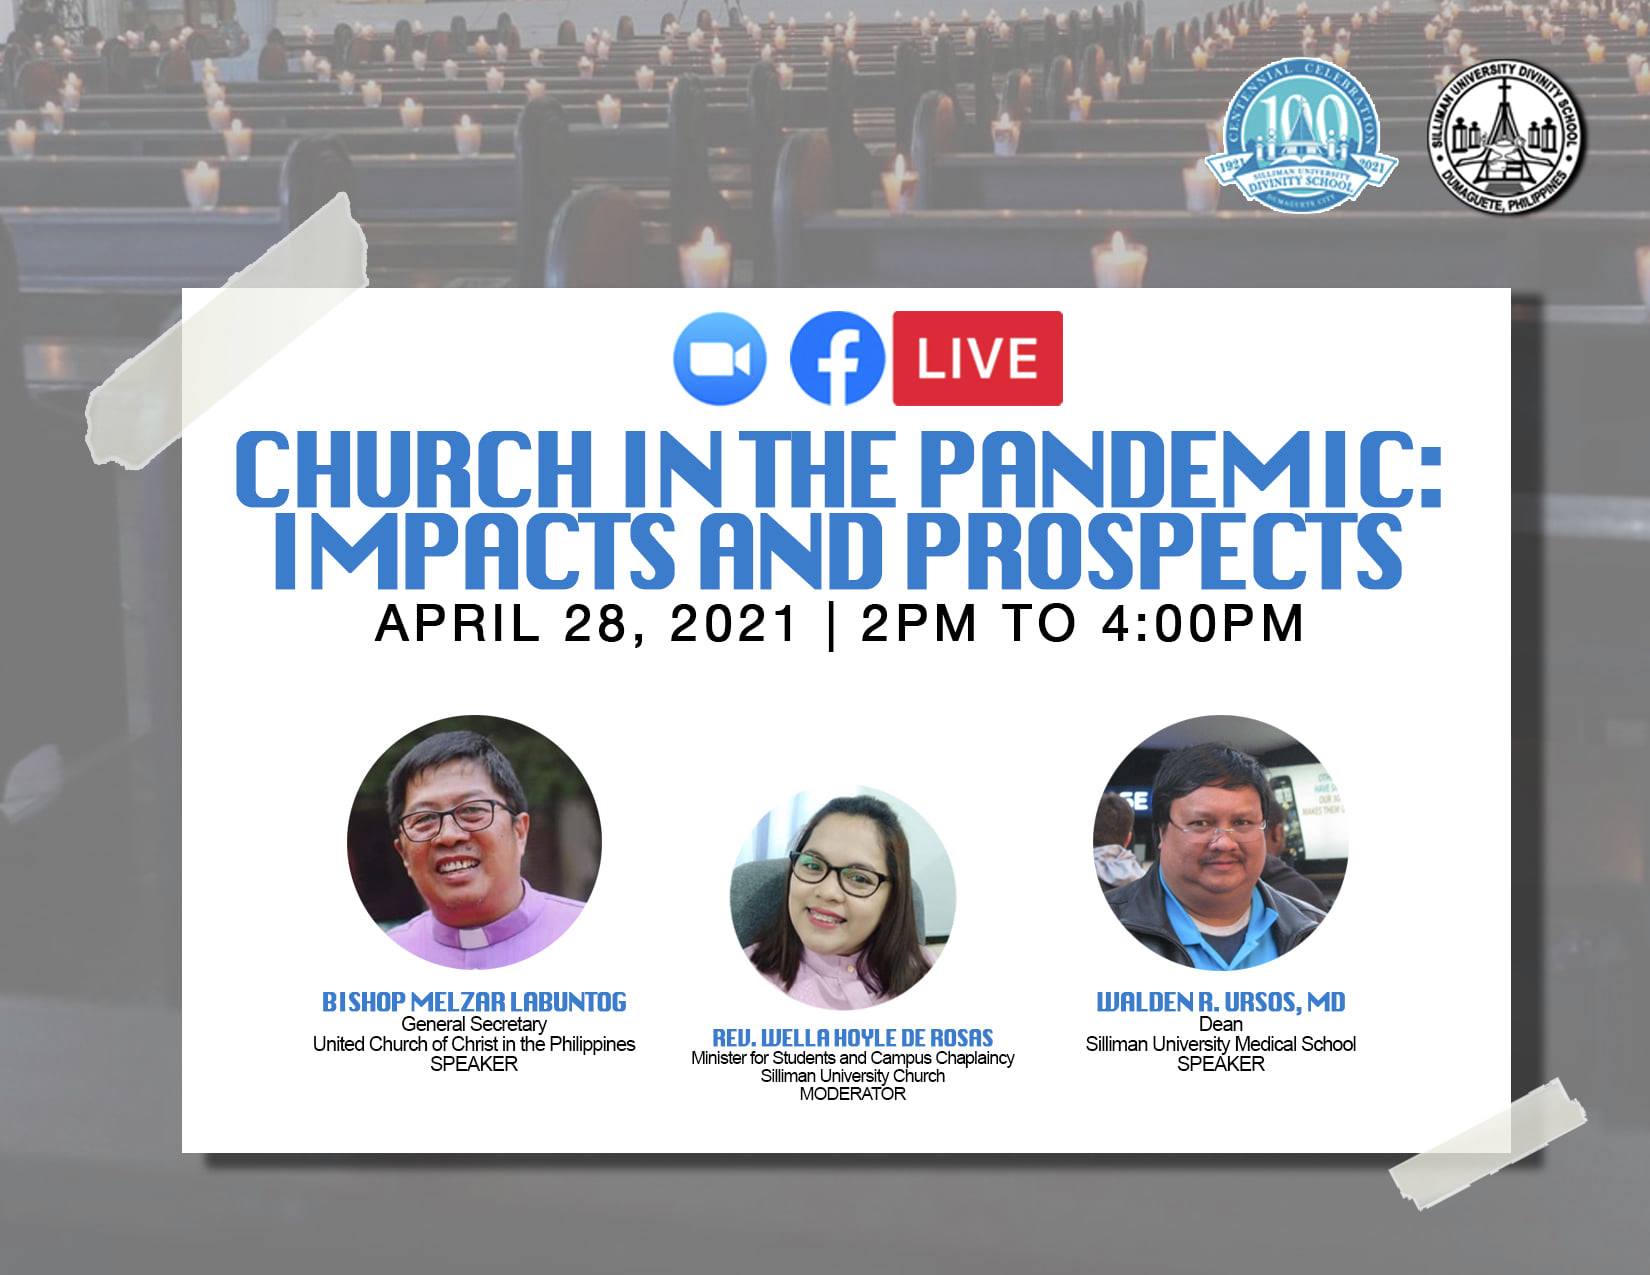 Divinity School webinar emphasizes state of the Church amid pandemic